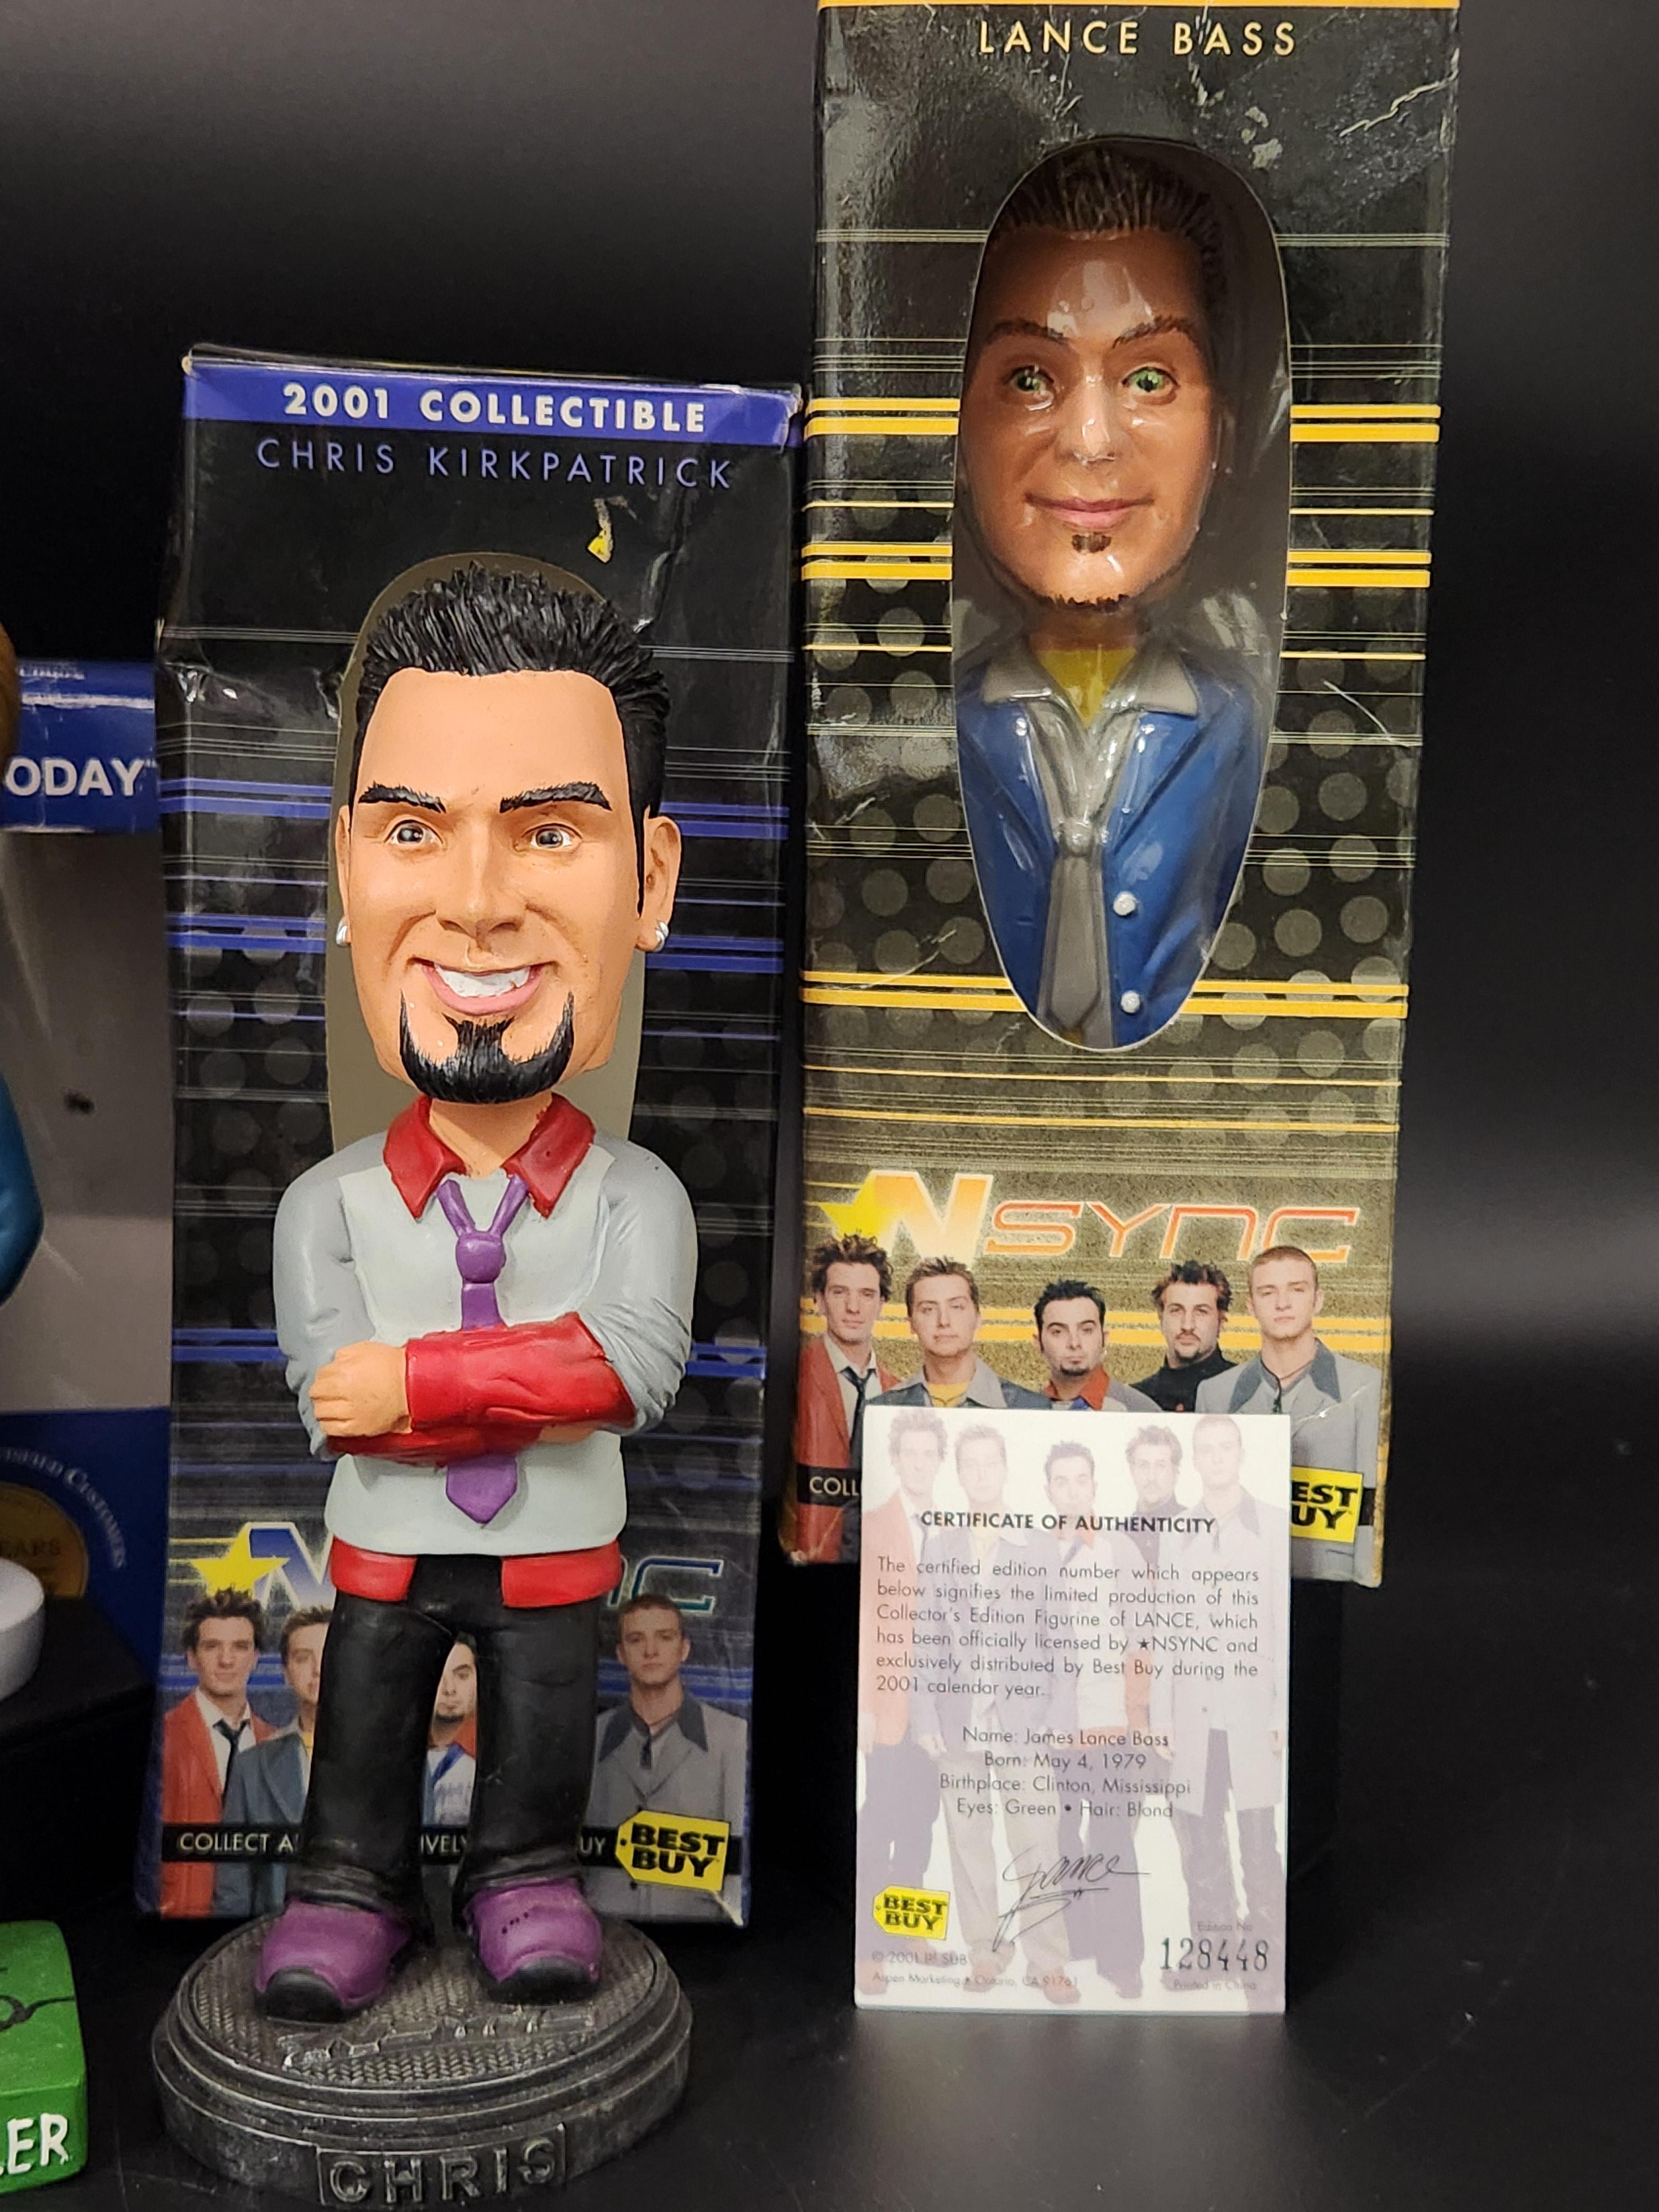 Assorted Bobbleheads